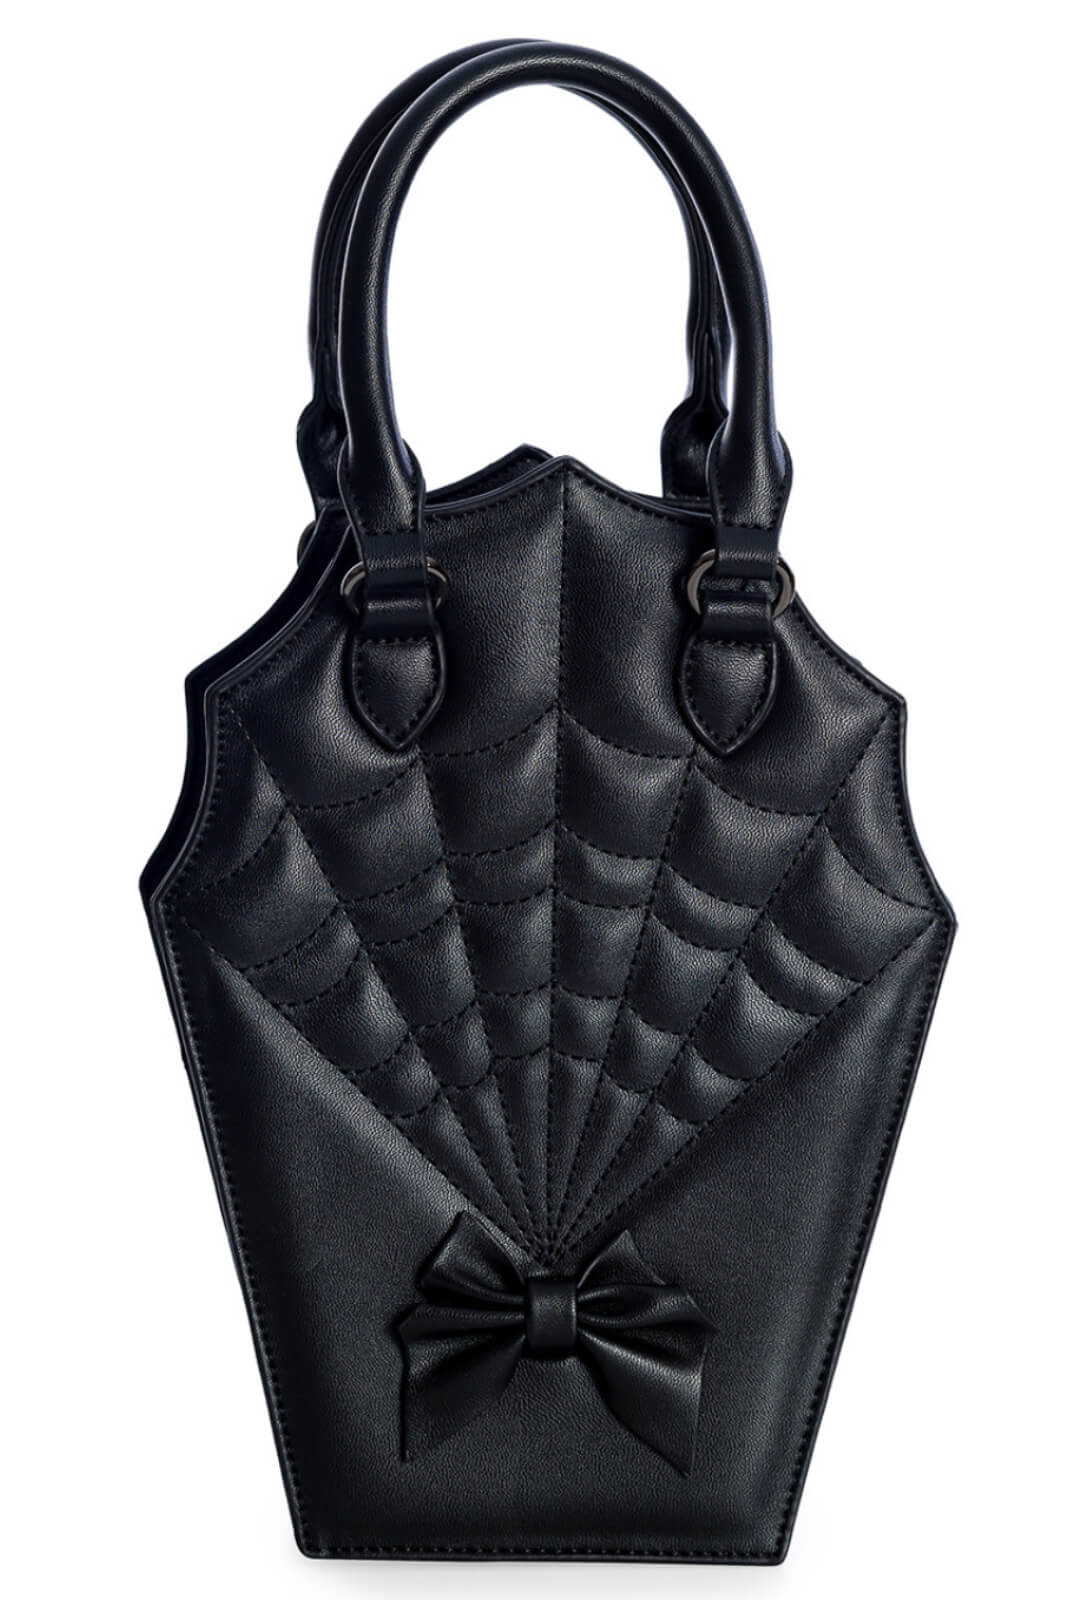 Banned Bow Gothic Spiderweb Ghoul Bag